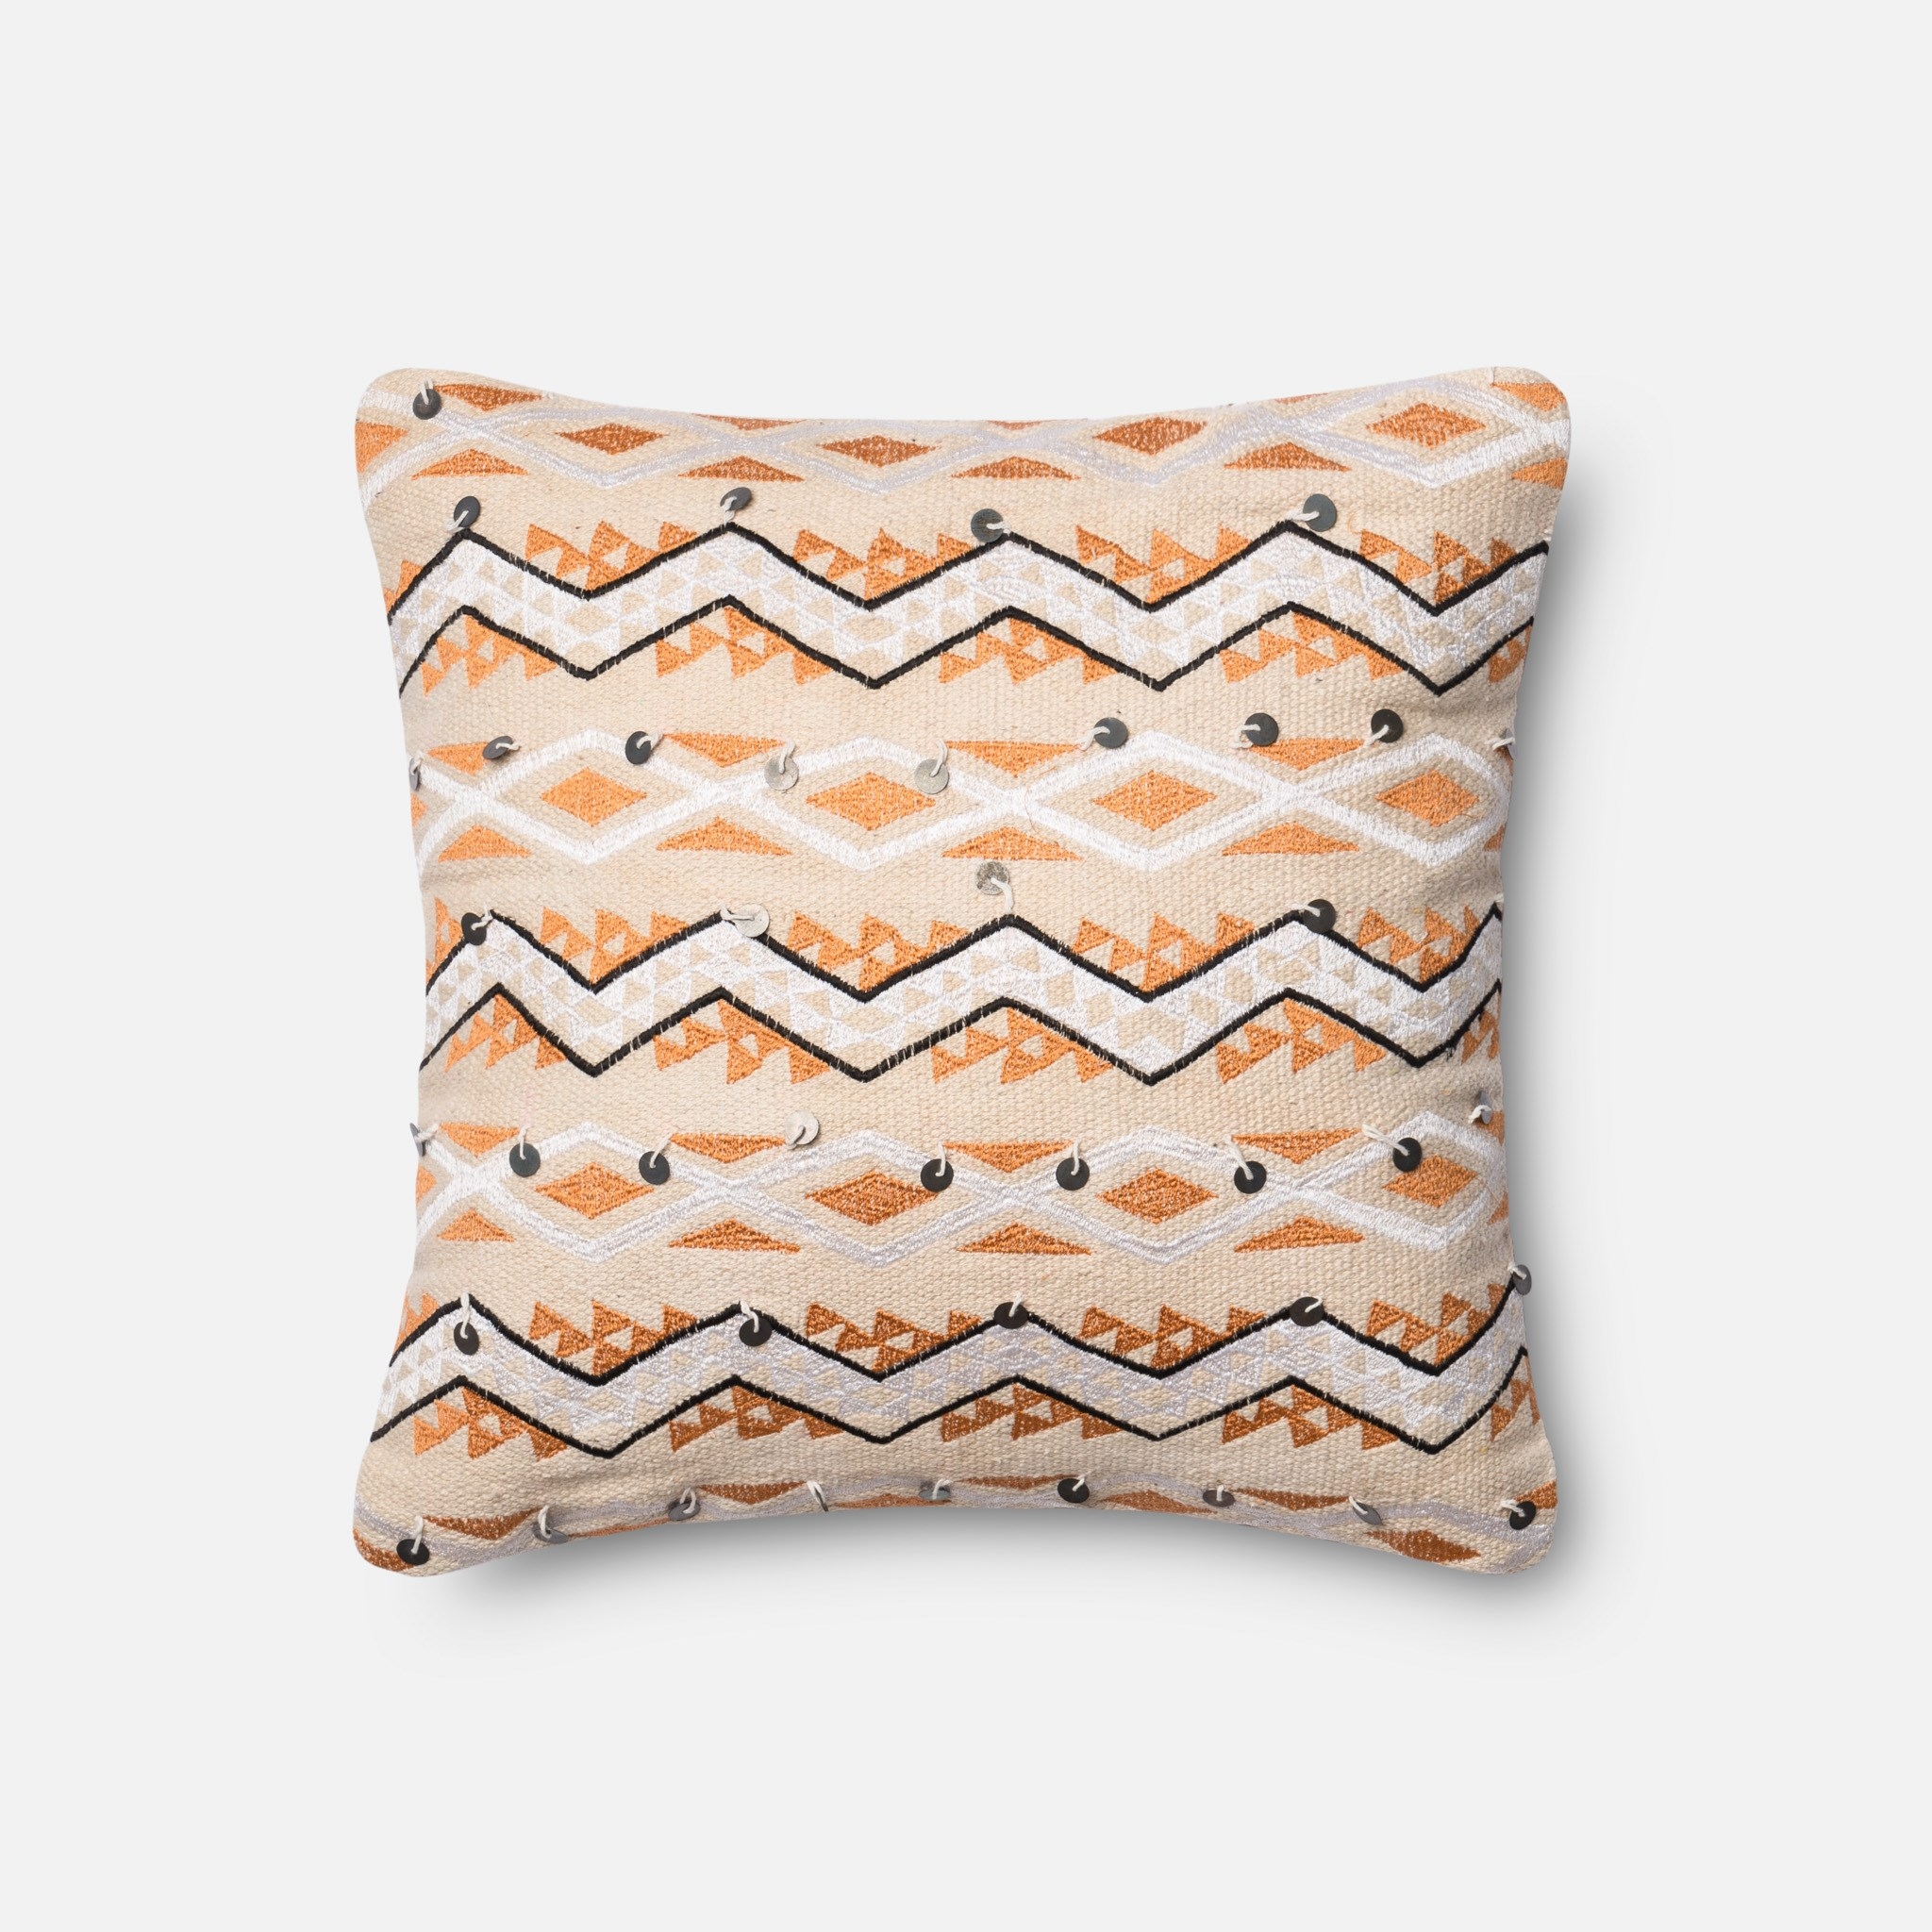 P0401 ORANGE / IVORY pillow - 18" x 18", Insert included - Image 0